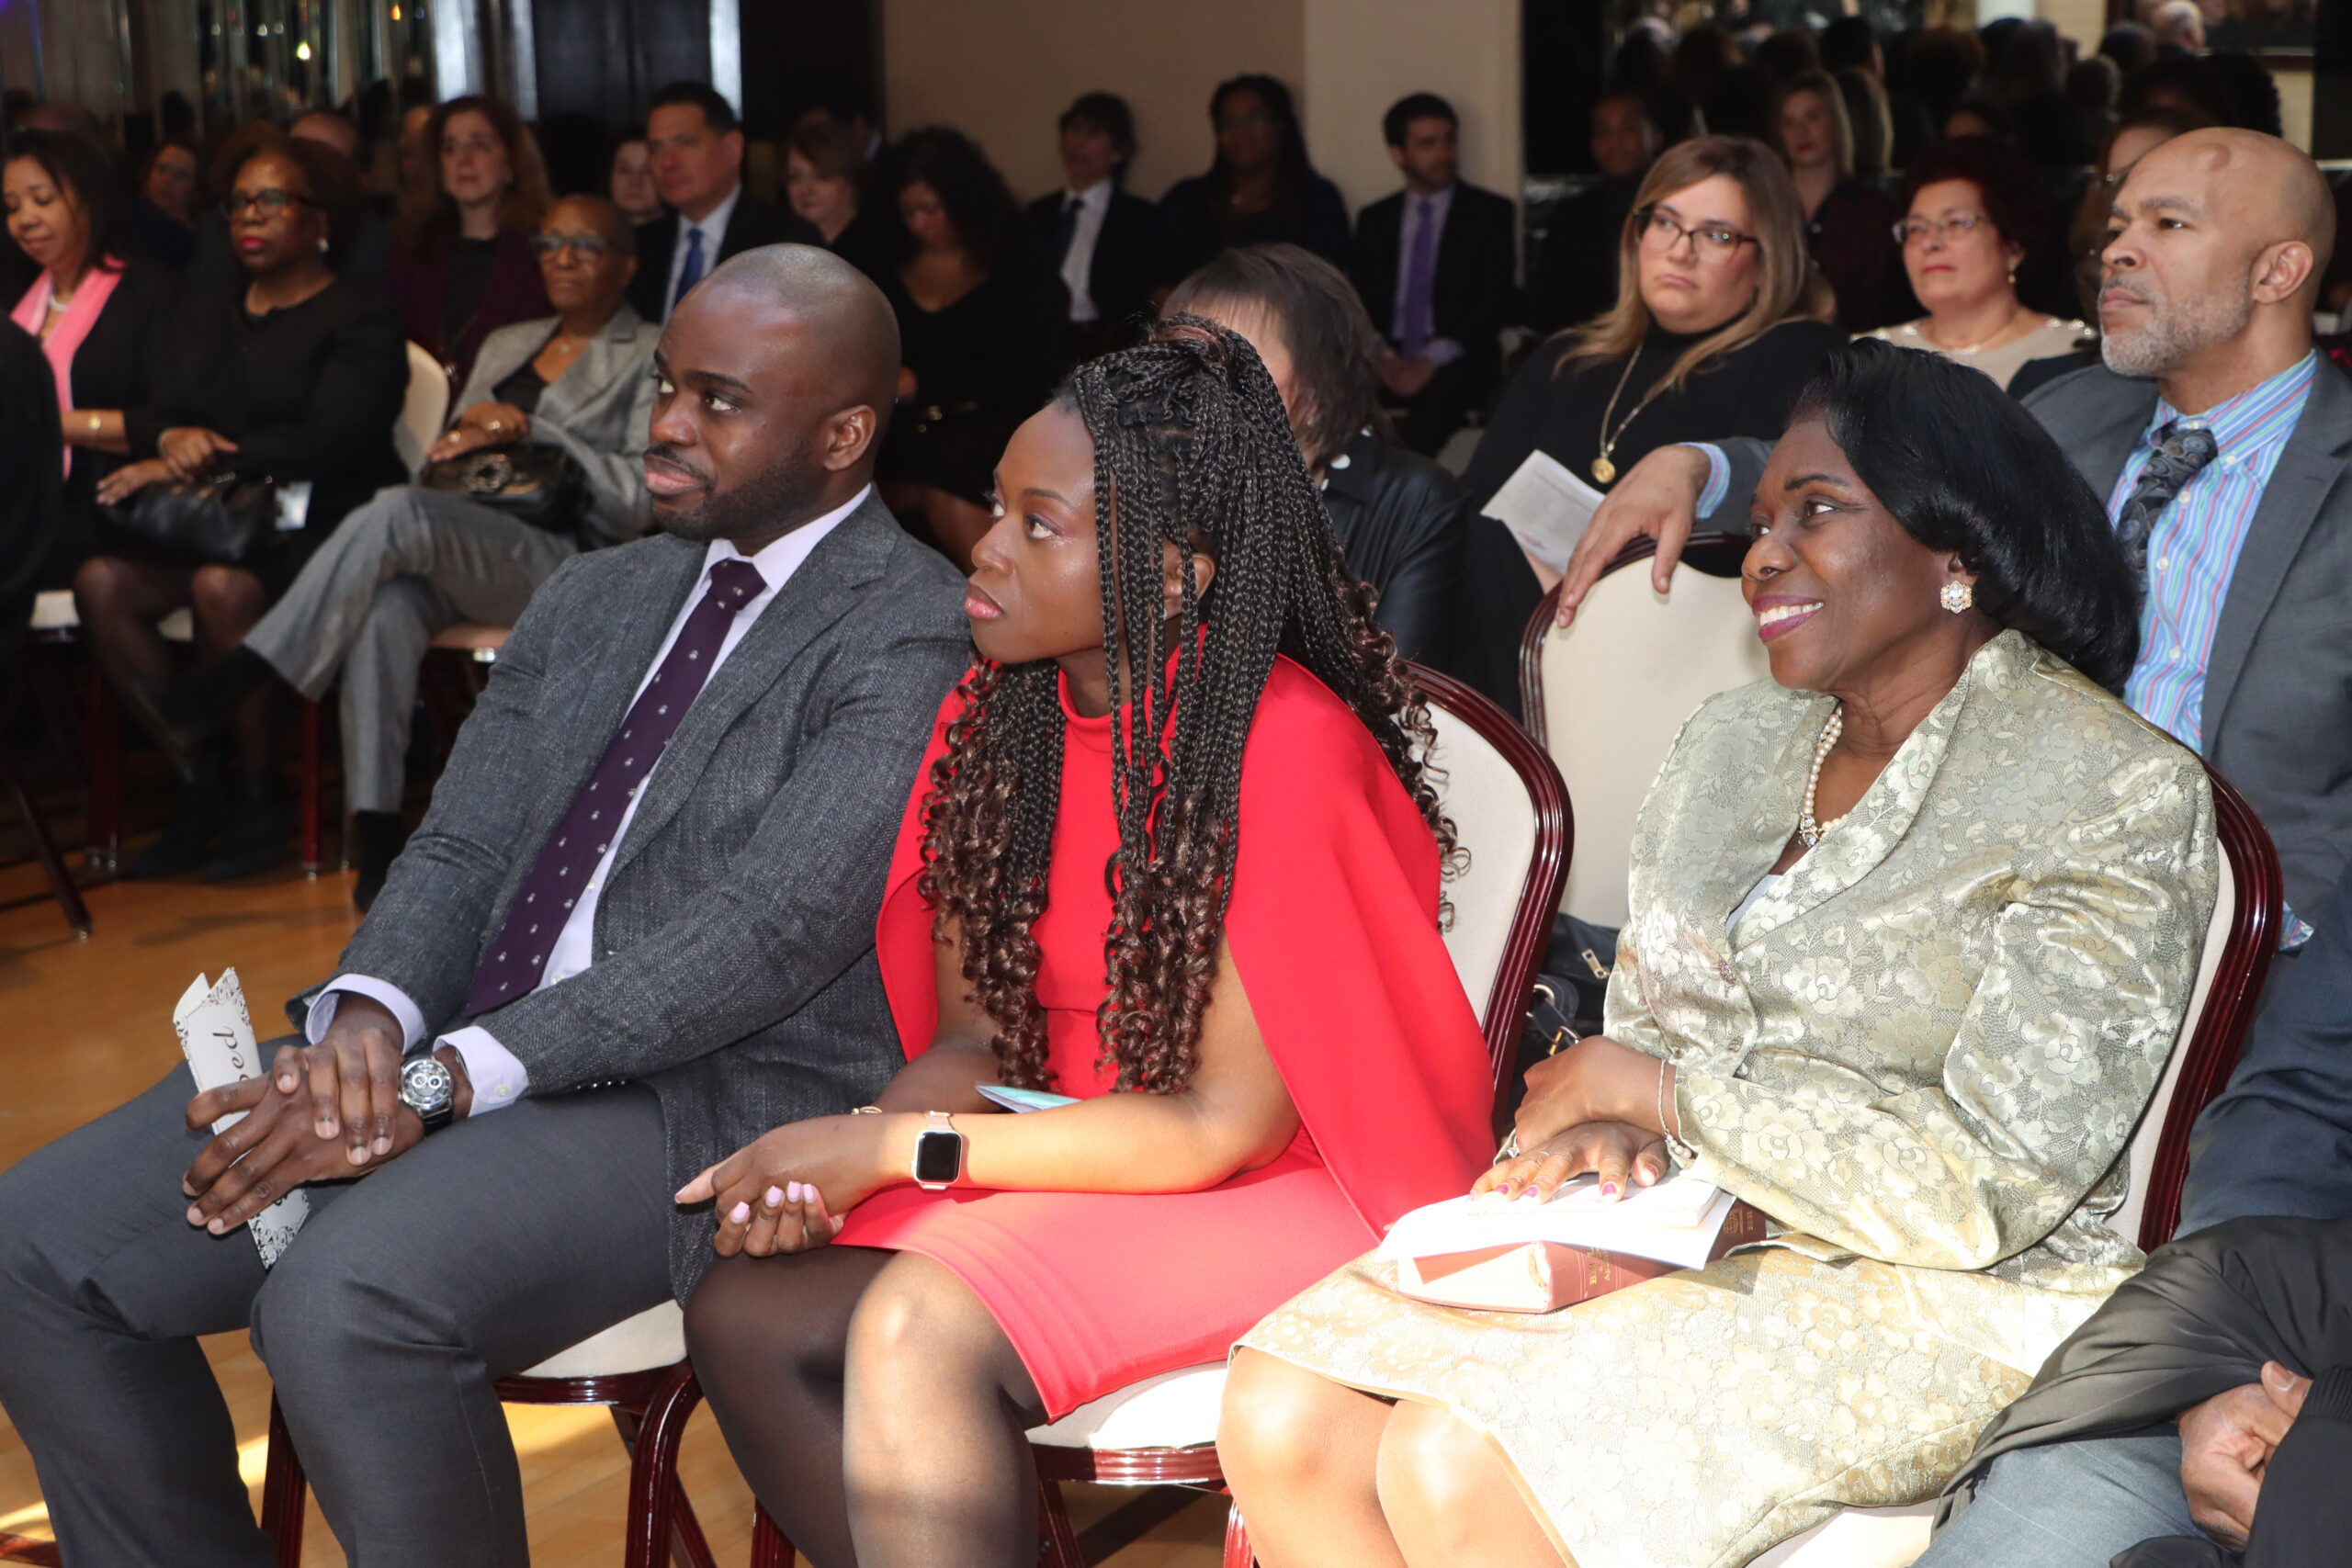 A candid moment with Hon. Betsey Jean-Jacques, sitting closely with her brother Marvin and mother Roseline.